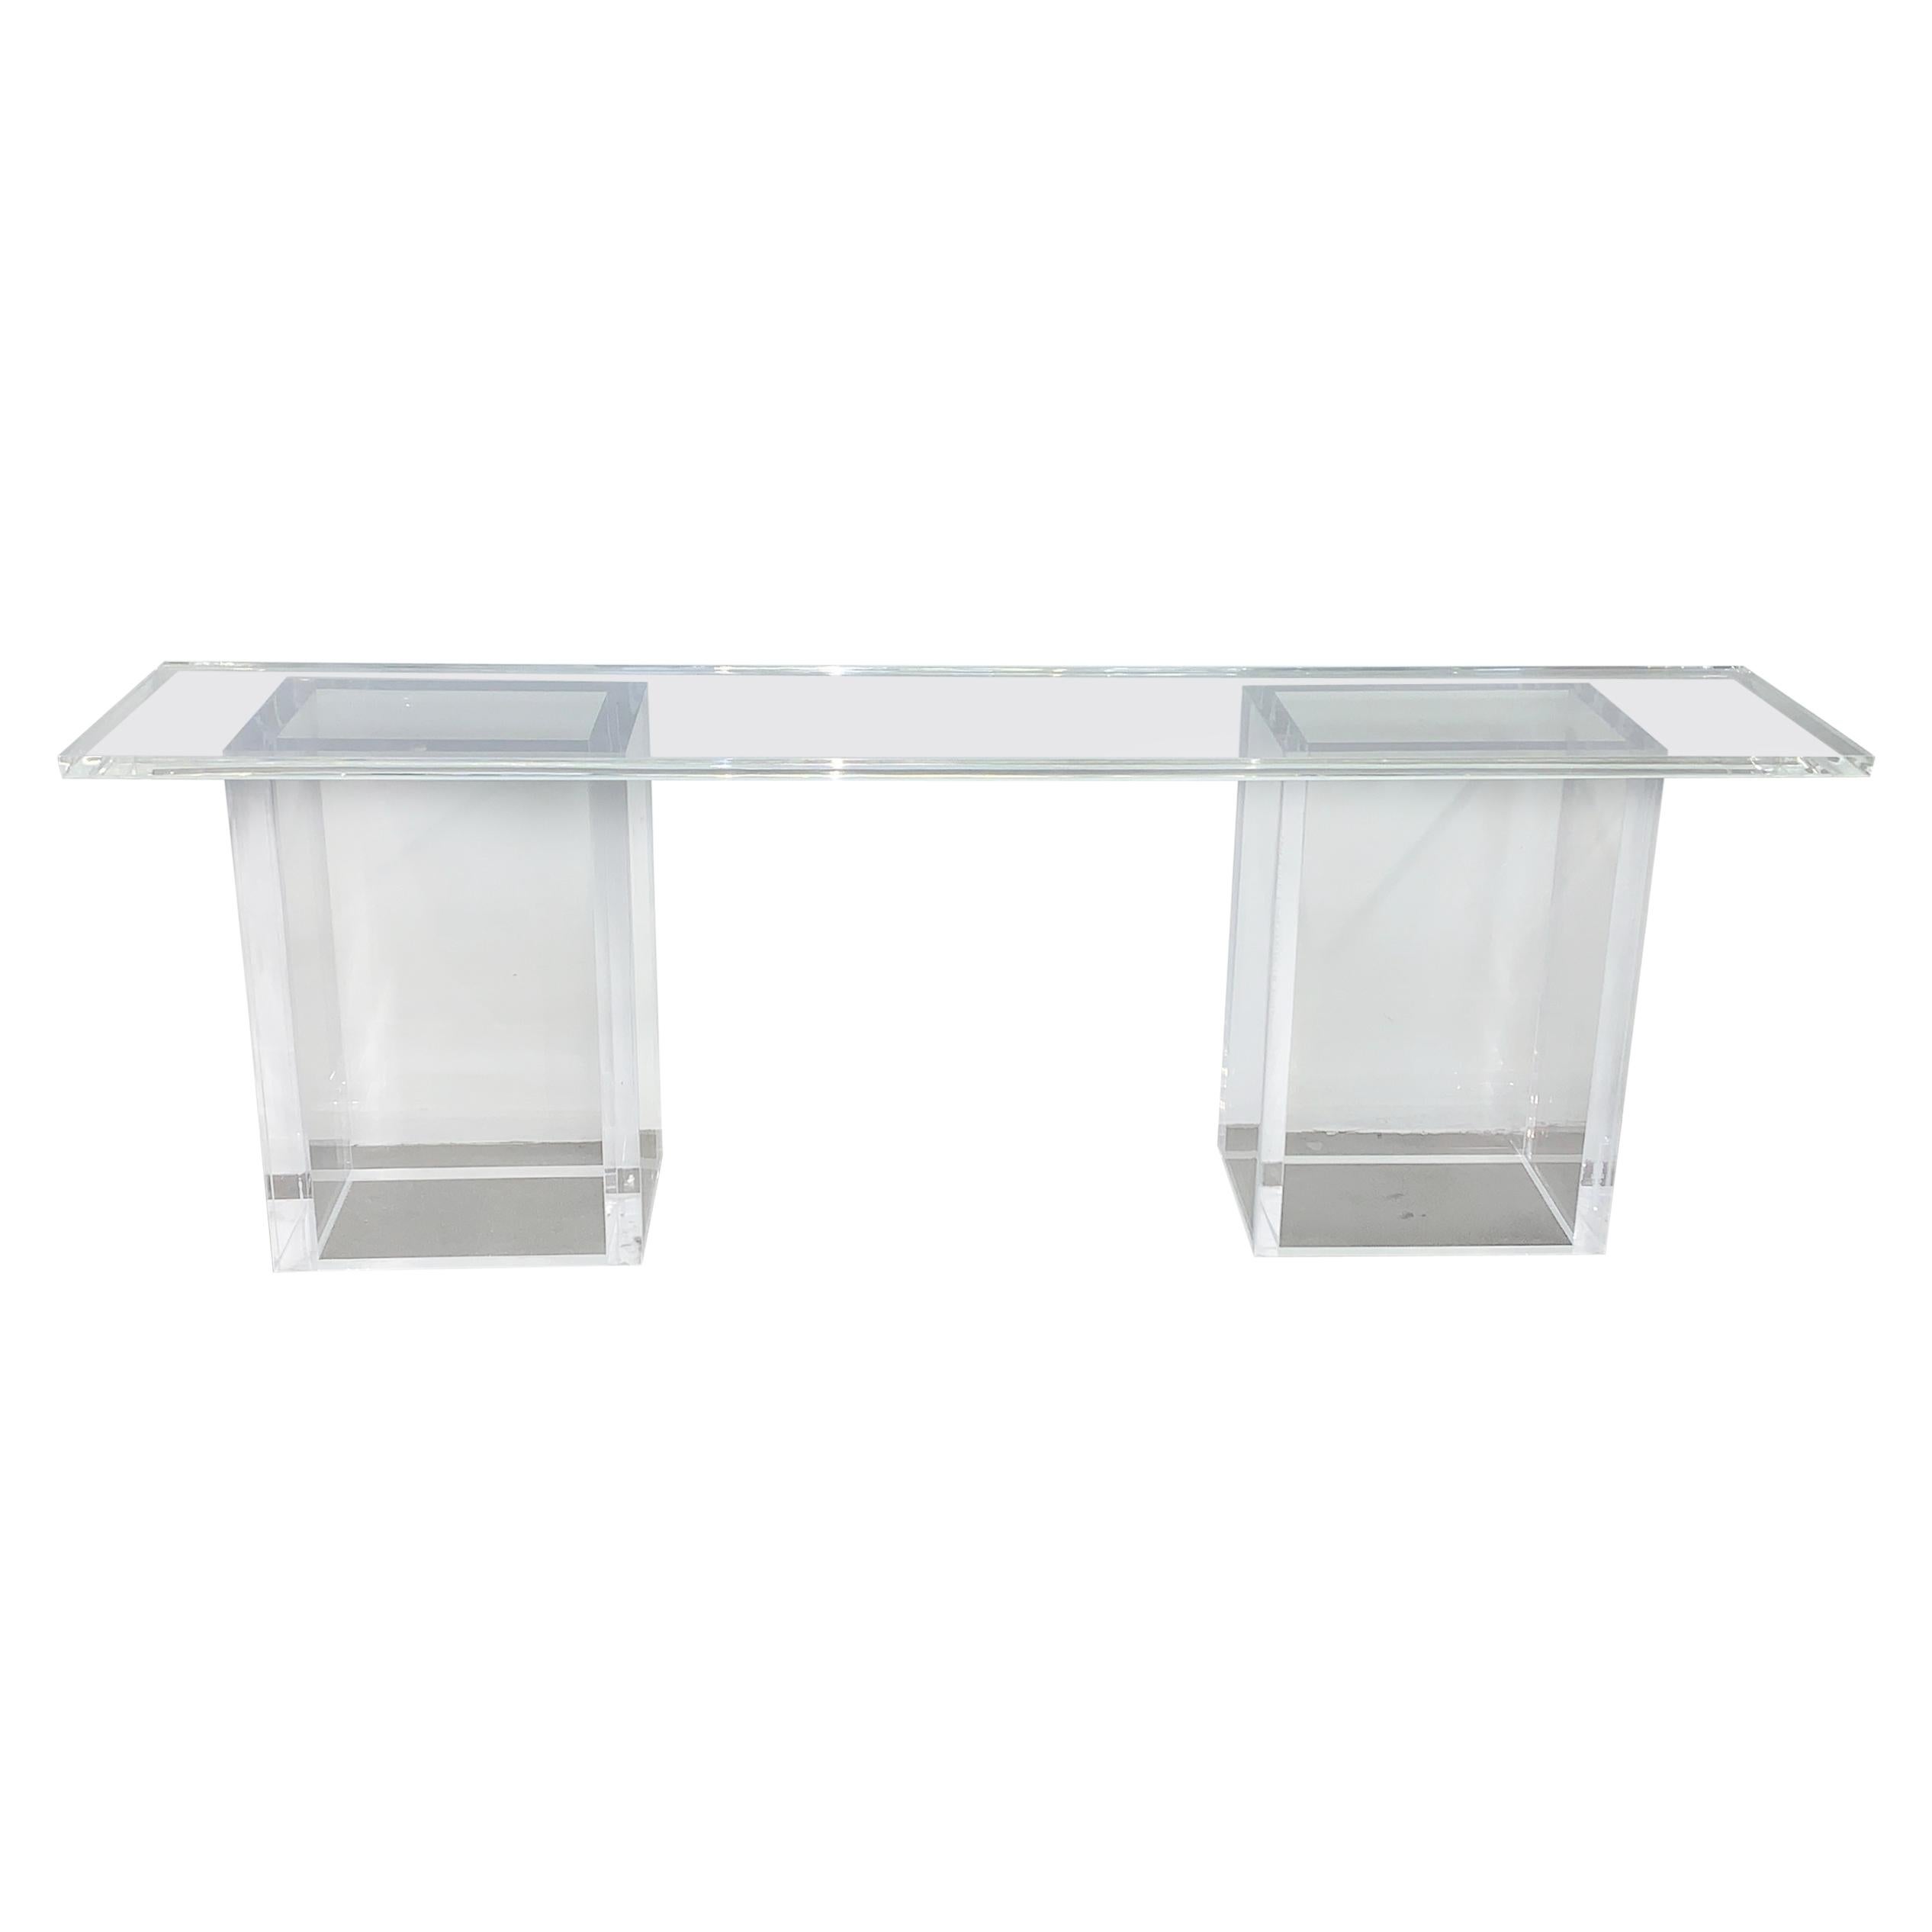 A unique and large all Lucite console or sofa table. The top has a rabbit edge under the top and the bases are solid and heavy. The top sits on the movable bases and this can be configured in different ways. There are some scratches to the Lucite